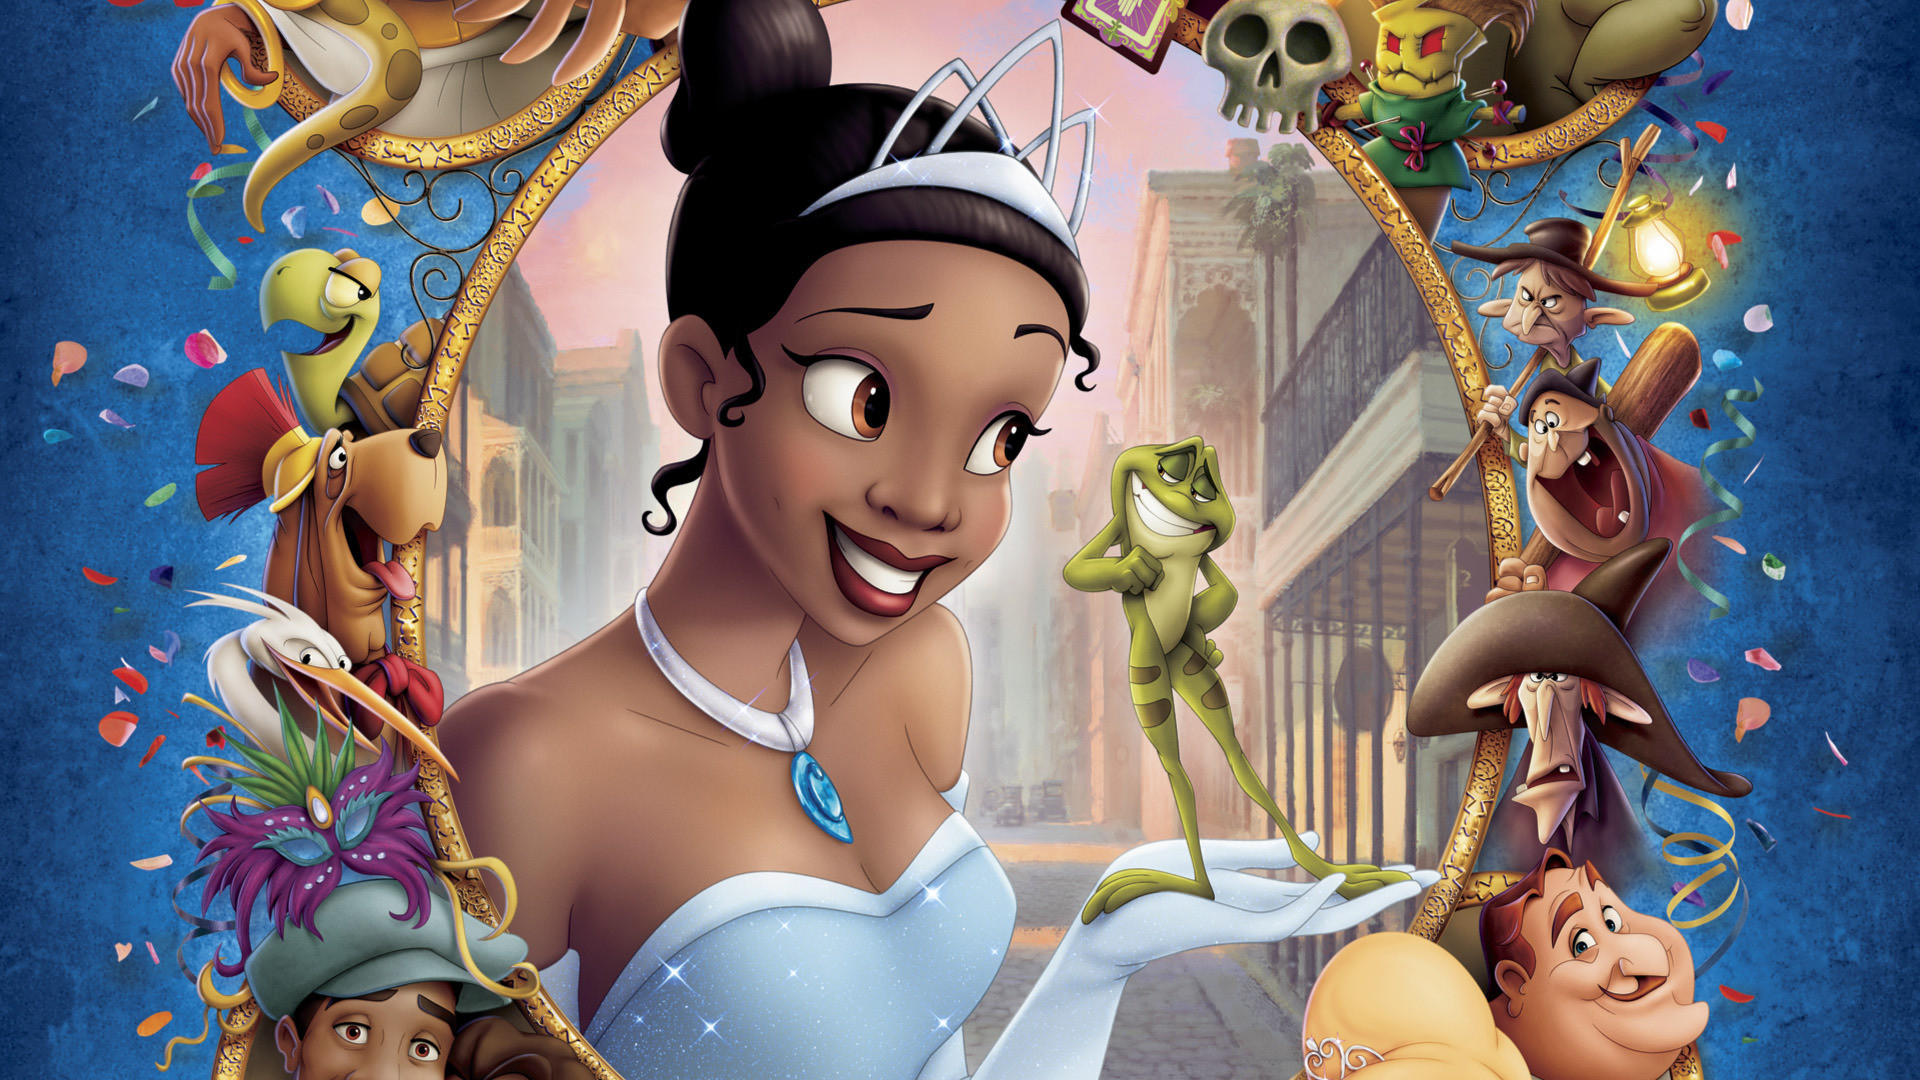 Princess and the Frog Wallpapers HD Wallpapers 1920x1080